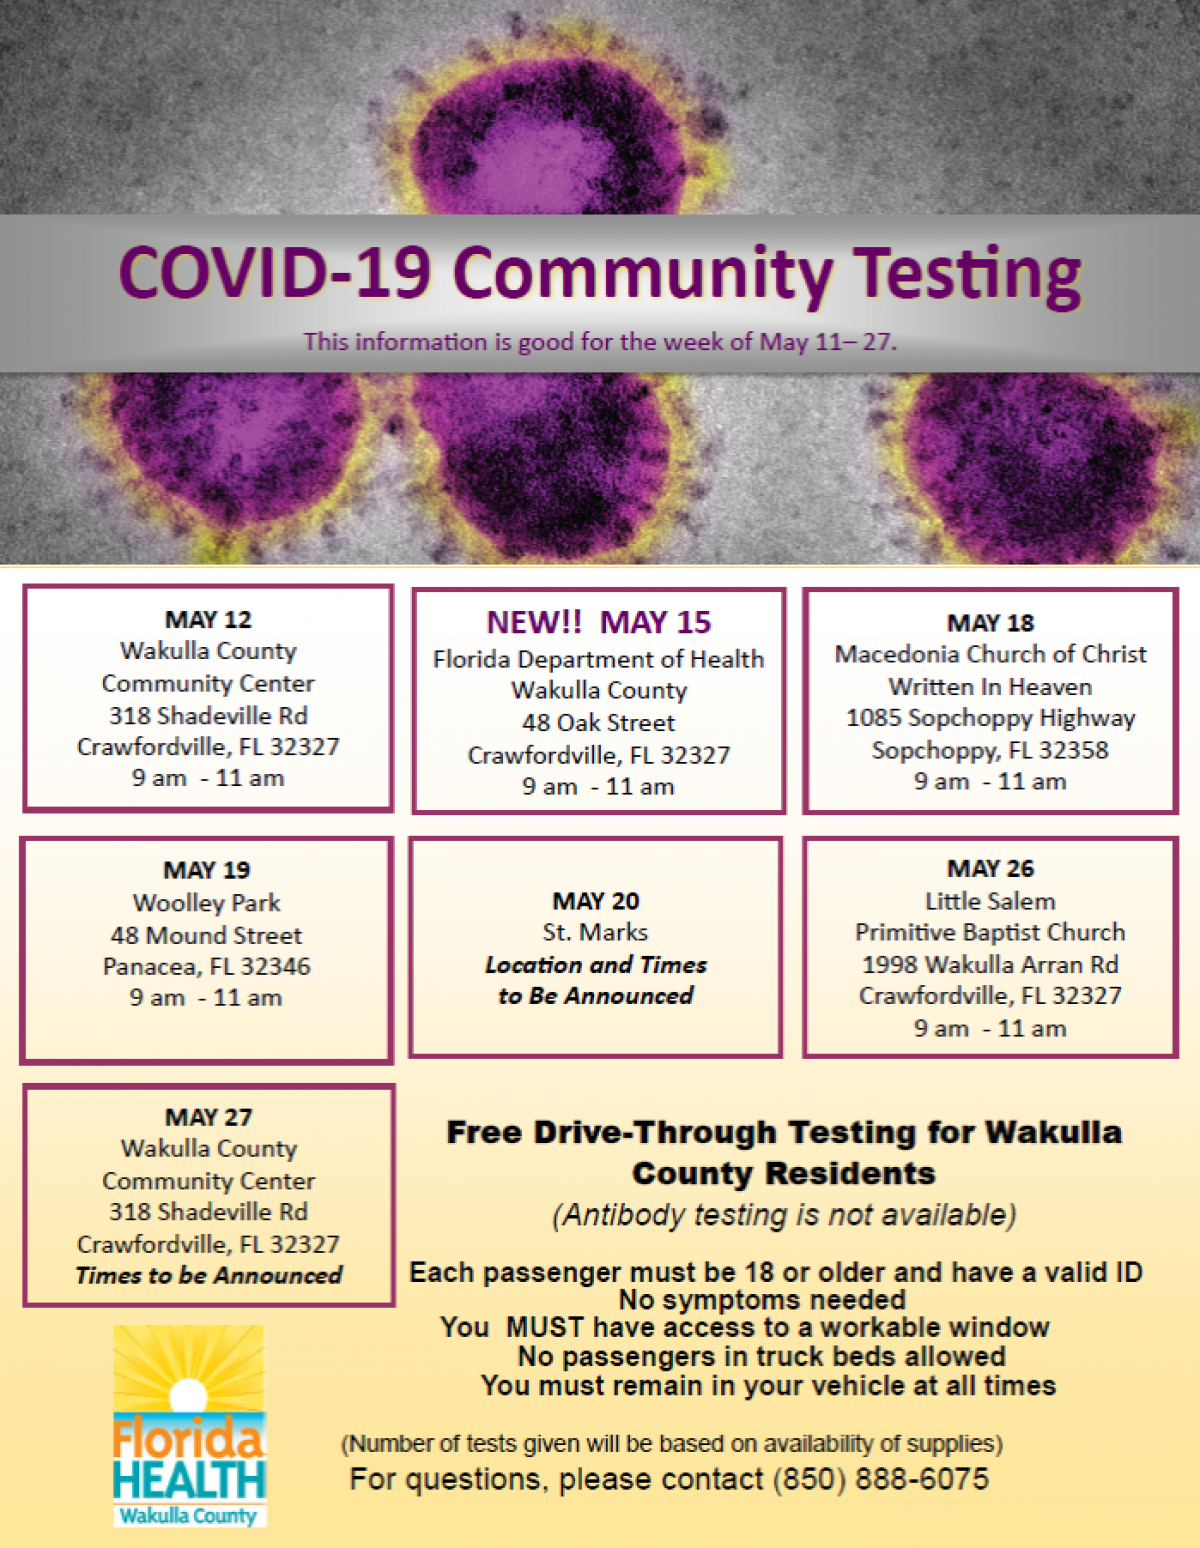 Wakulla County COVID-19 testing dates and locations